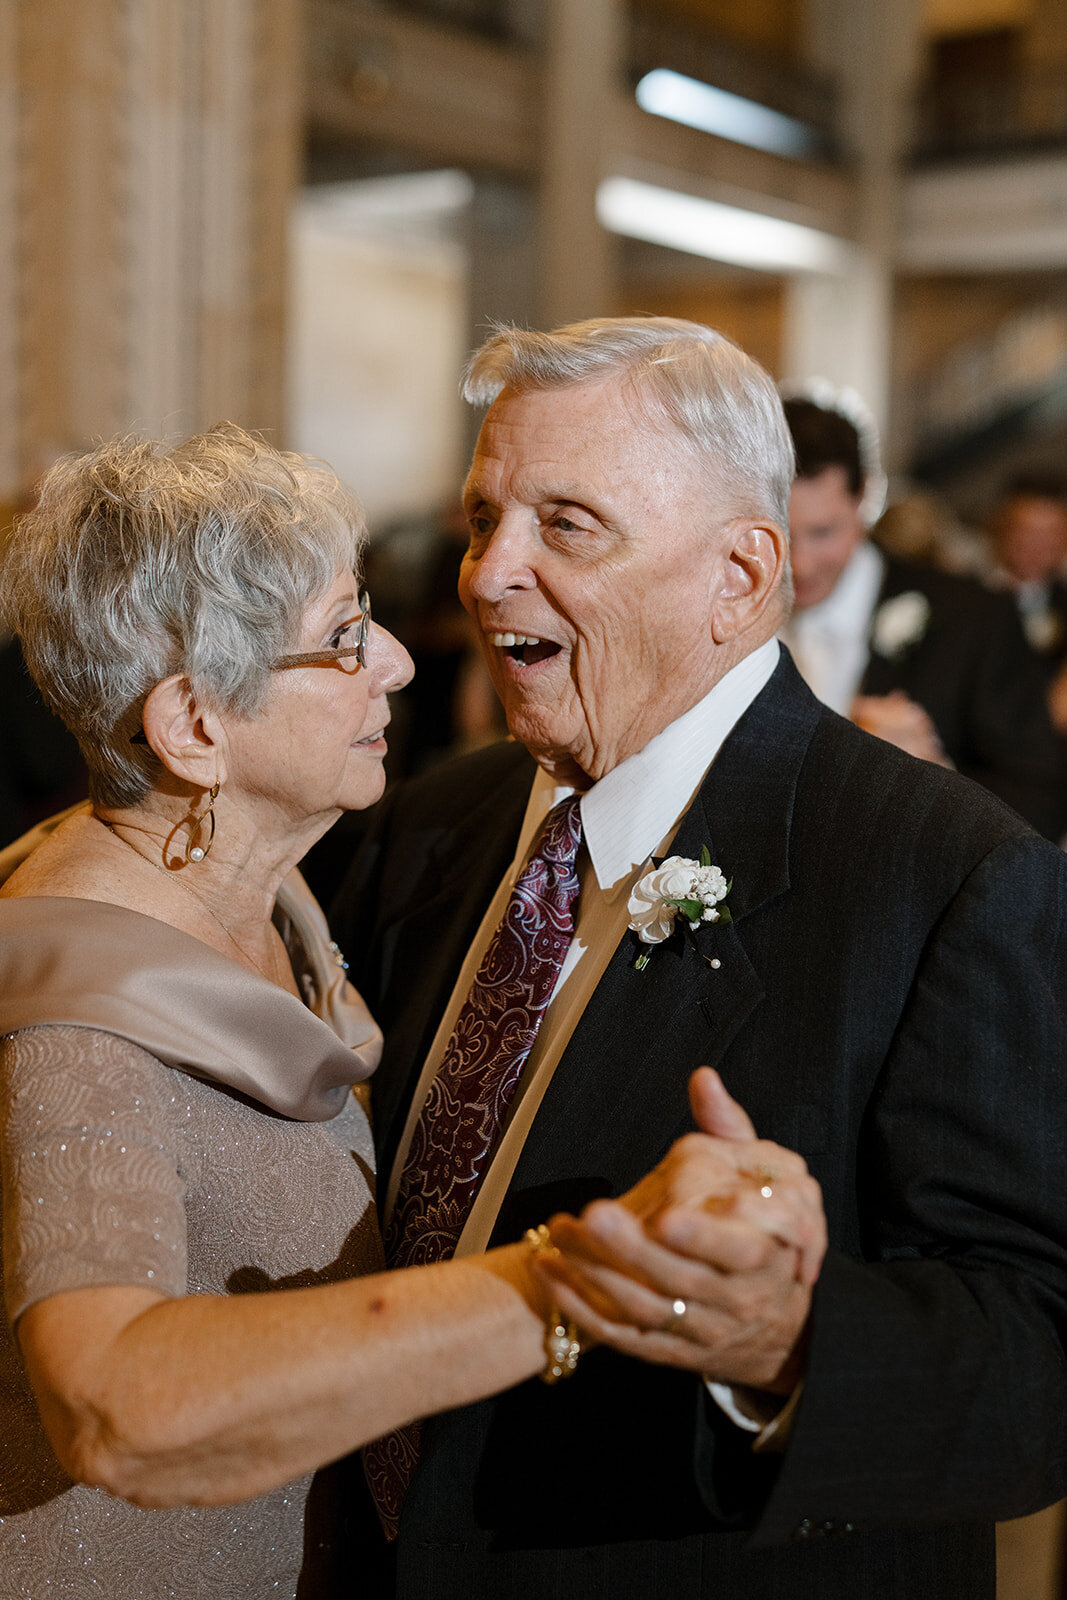 Kylie and Jack at The Grand Hall - Kansas City Wedding Photograpy - Nick and Lexie Photo Film-929